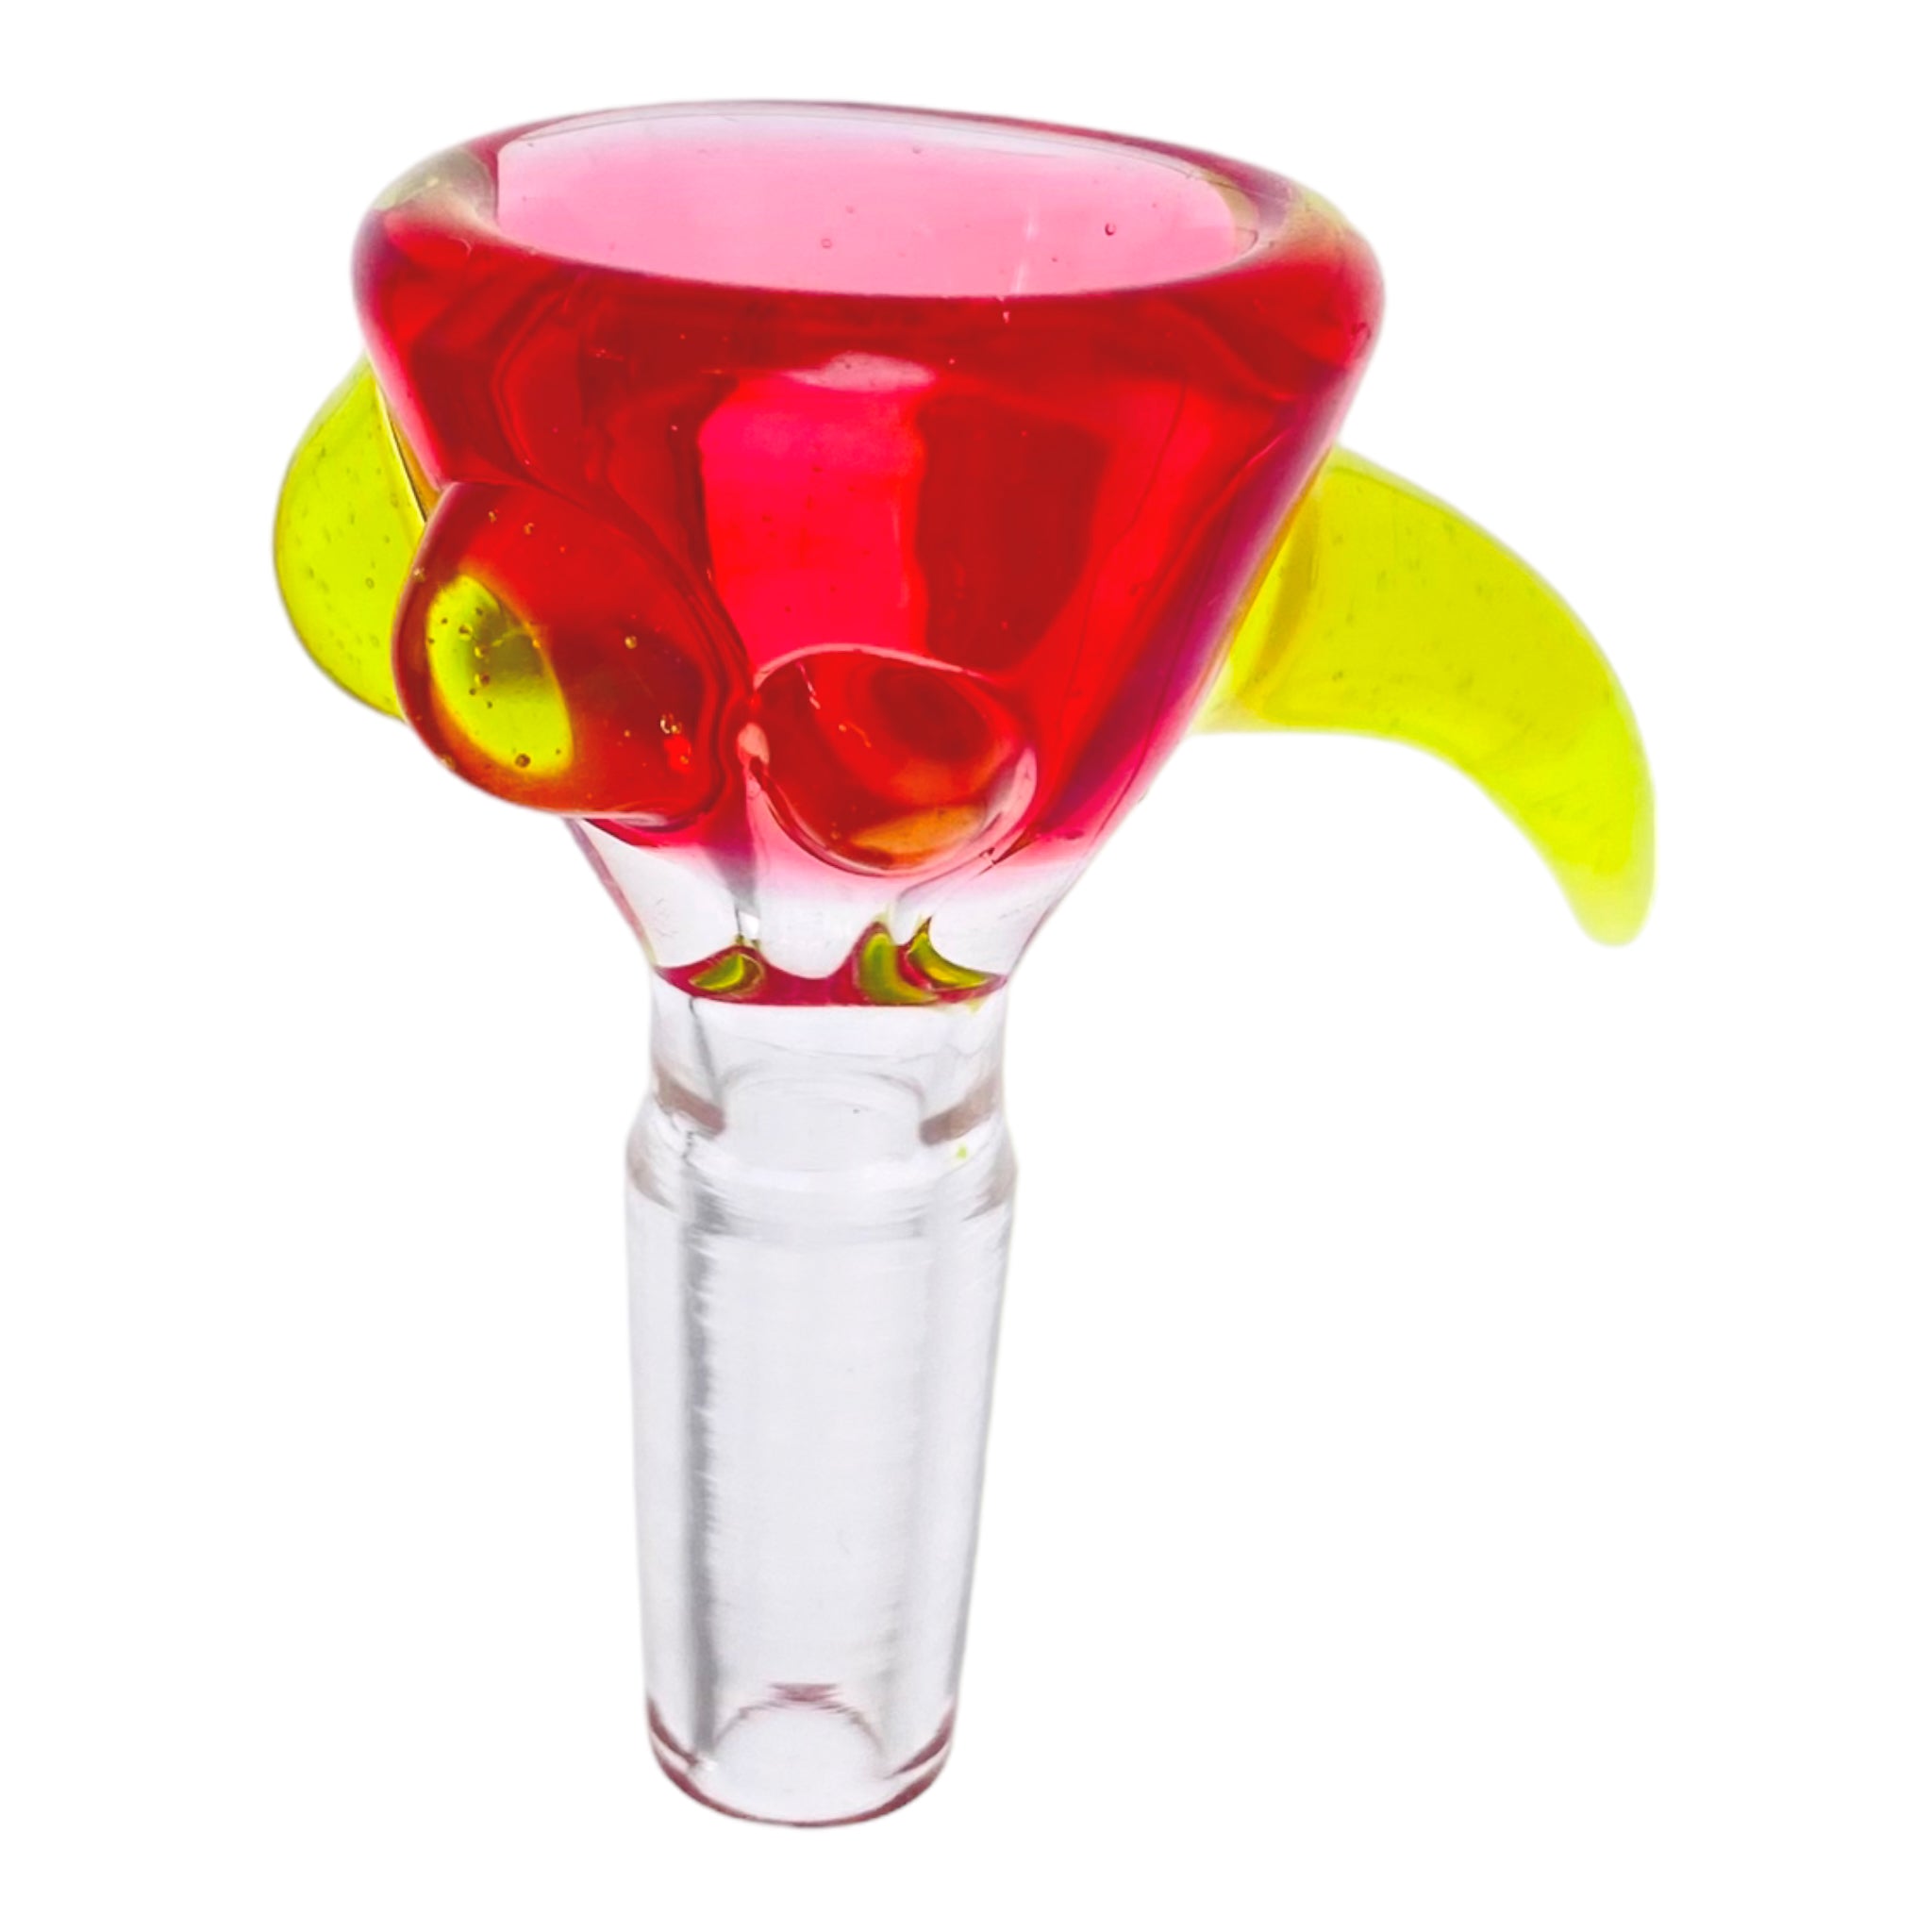 Arko Glass - 10mm Flower Bowl - Crimson Pink With Green Handle & Dots